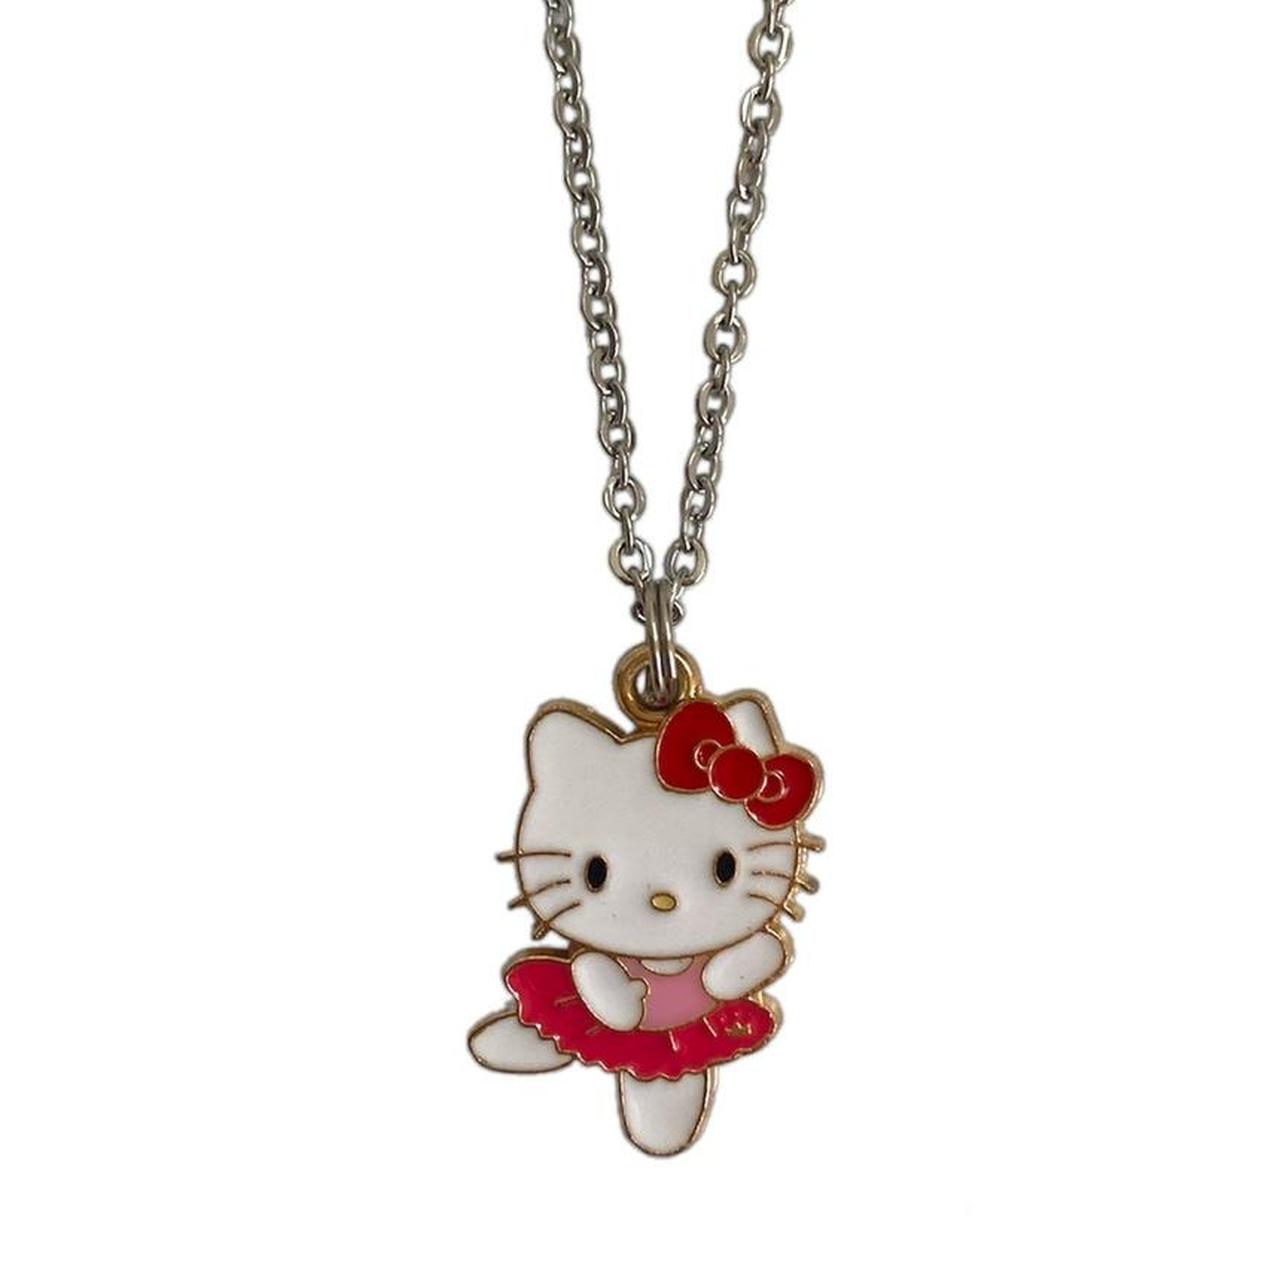 Shop Personalized Hello Kitty Jewelry Online Today | Sally Rose